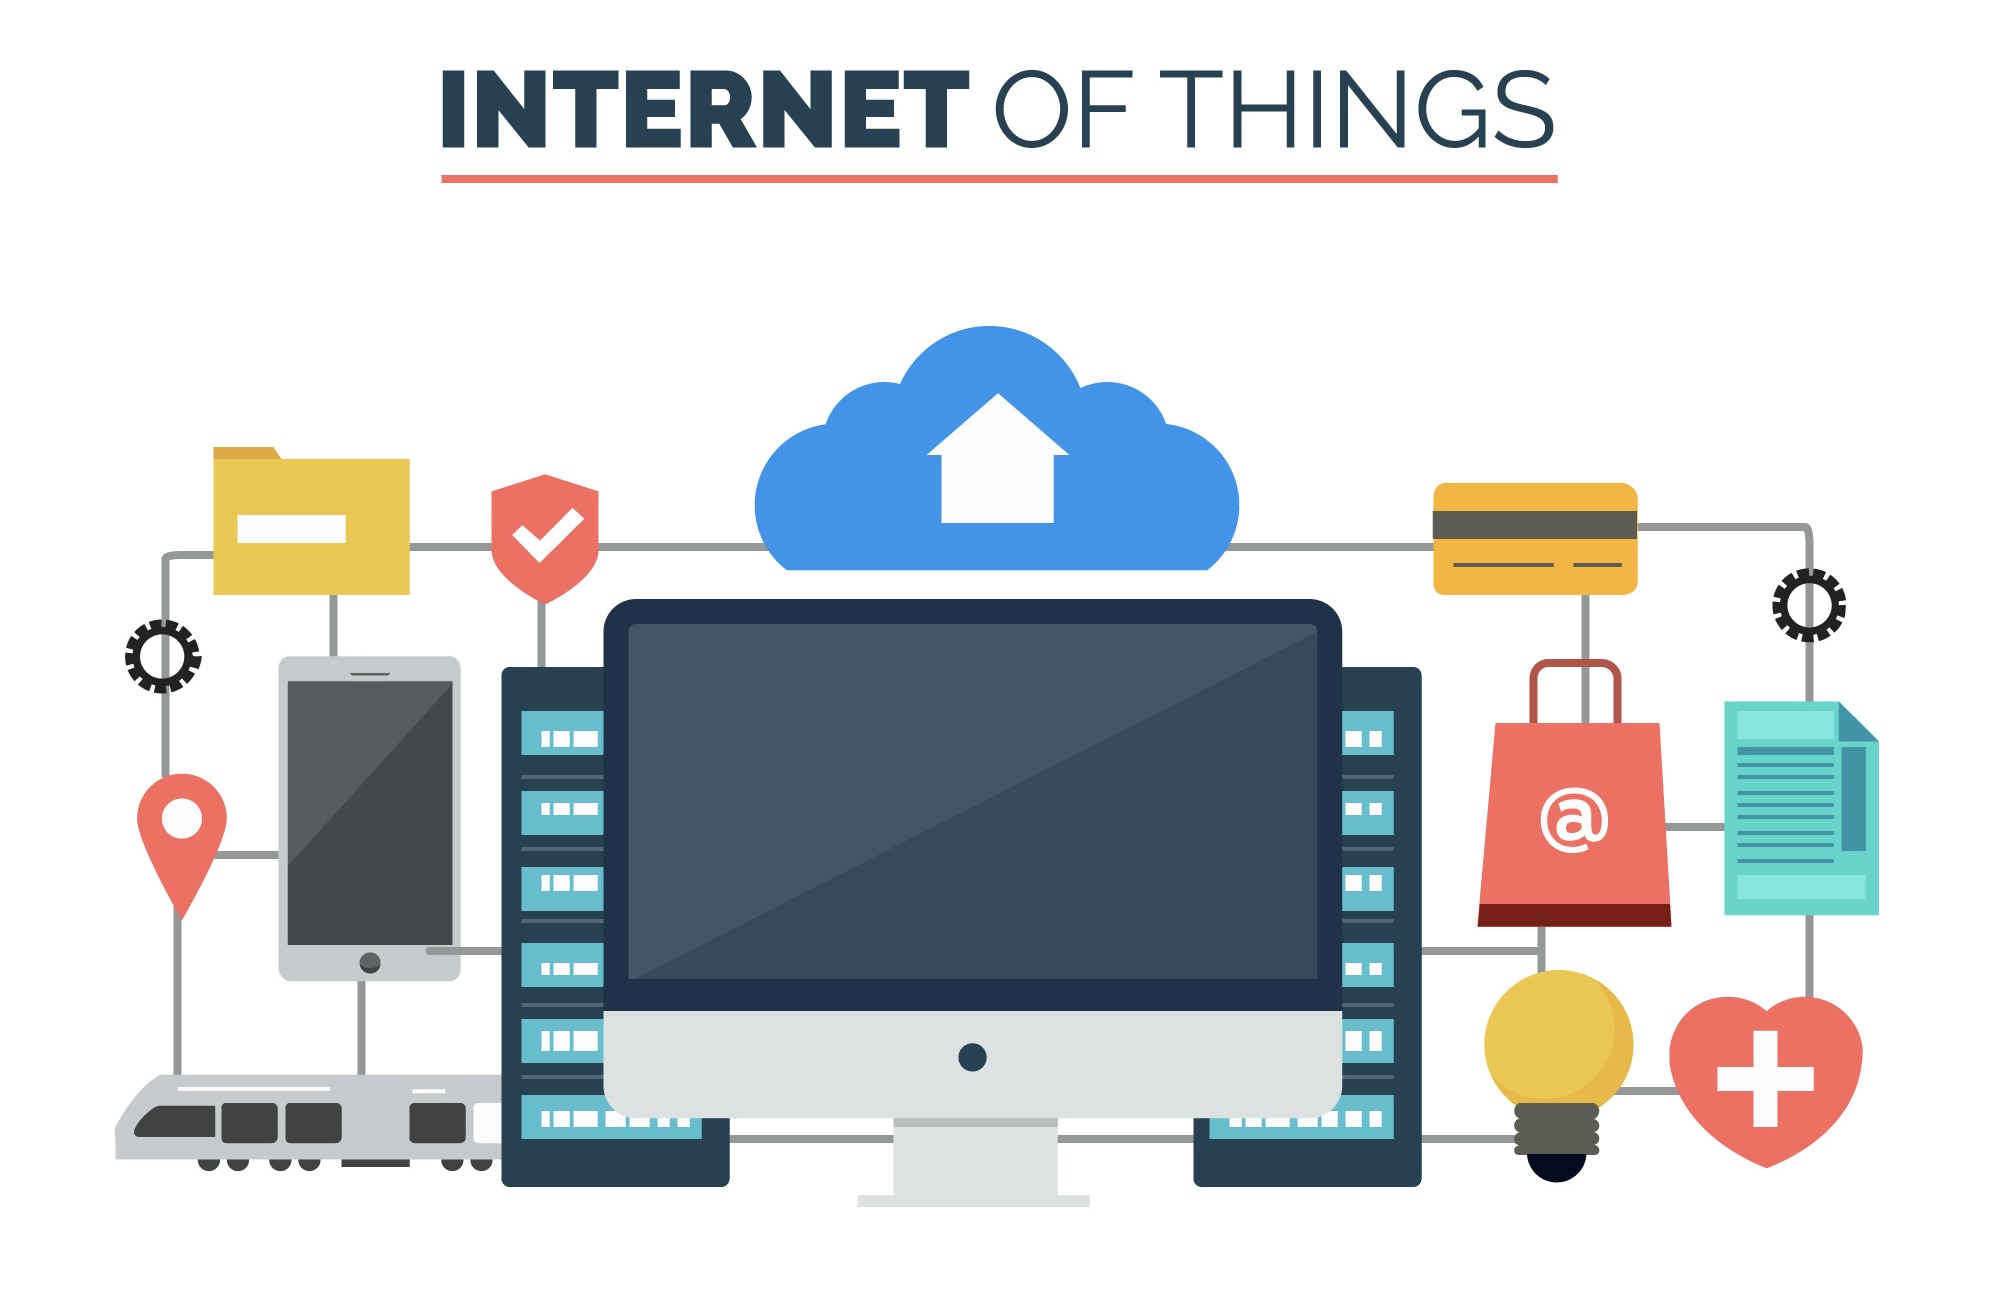 The Basic of Internet of Things